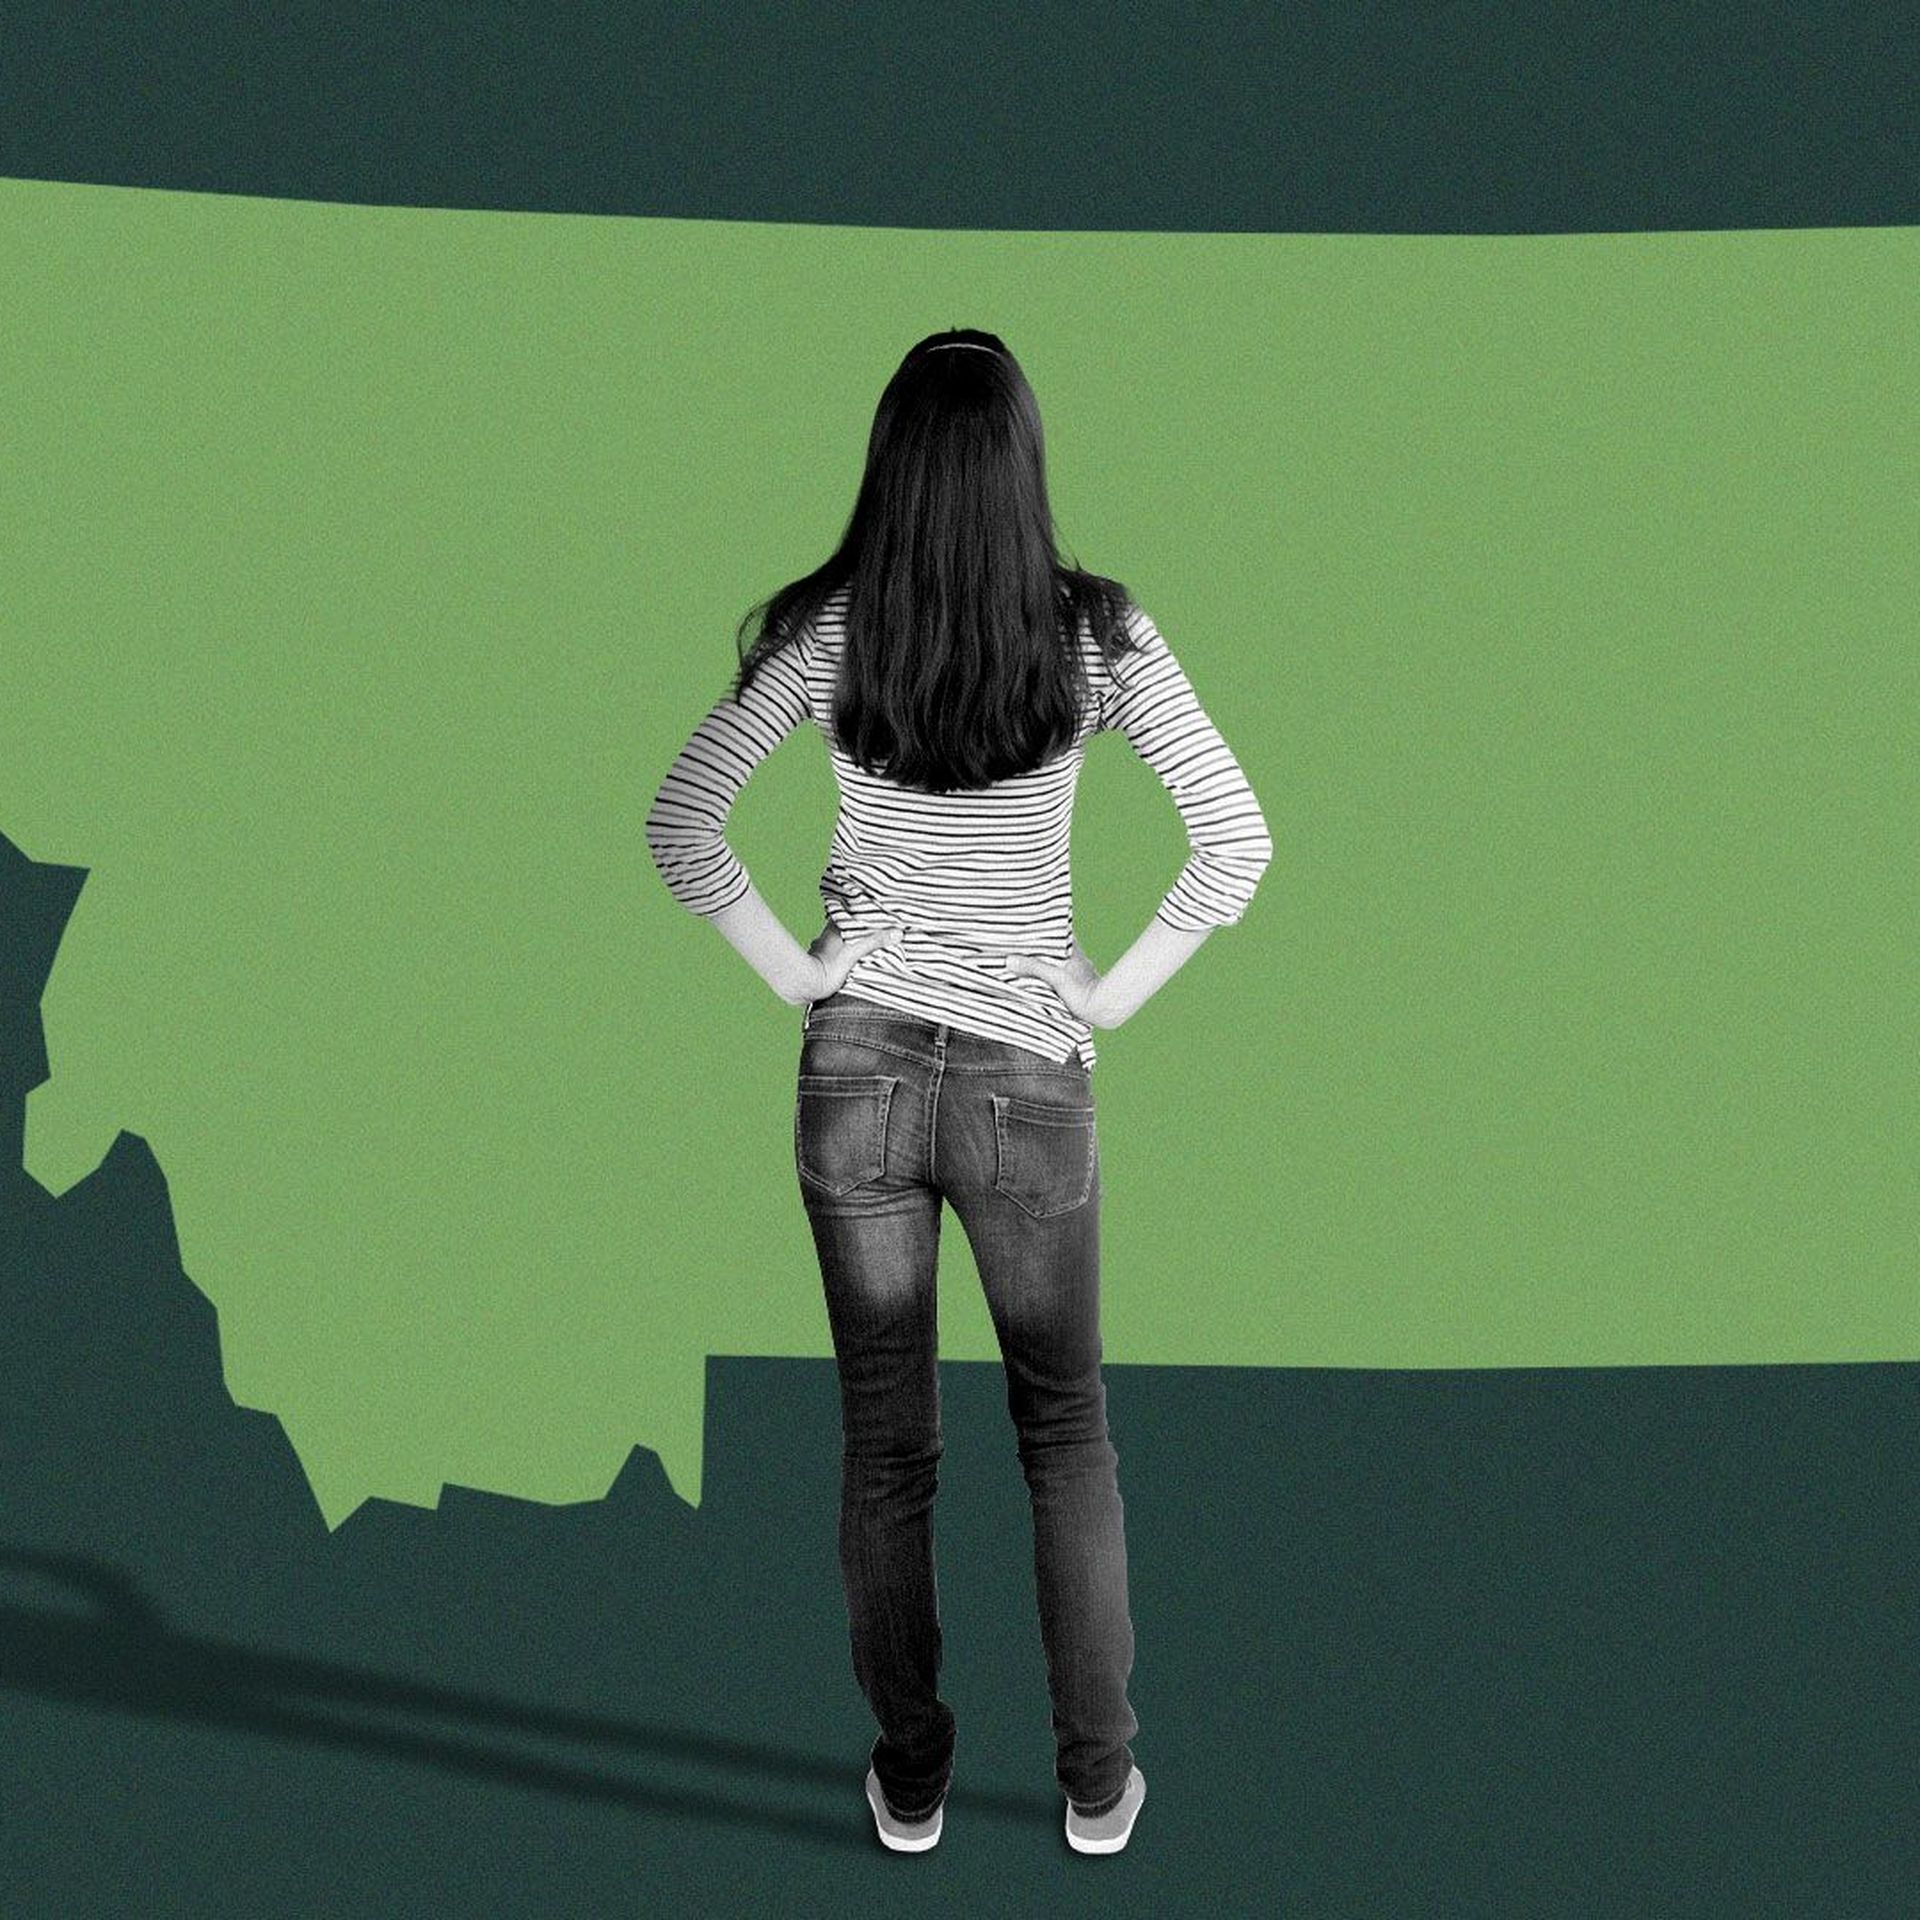 Illustration of a young girl looking at the state of Montana.